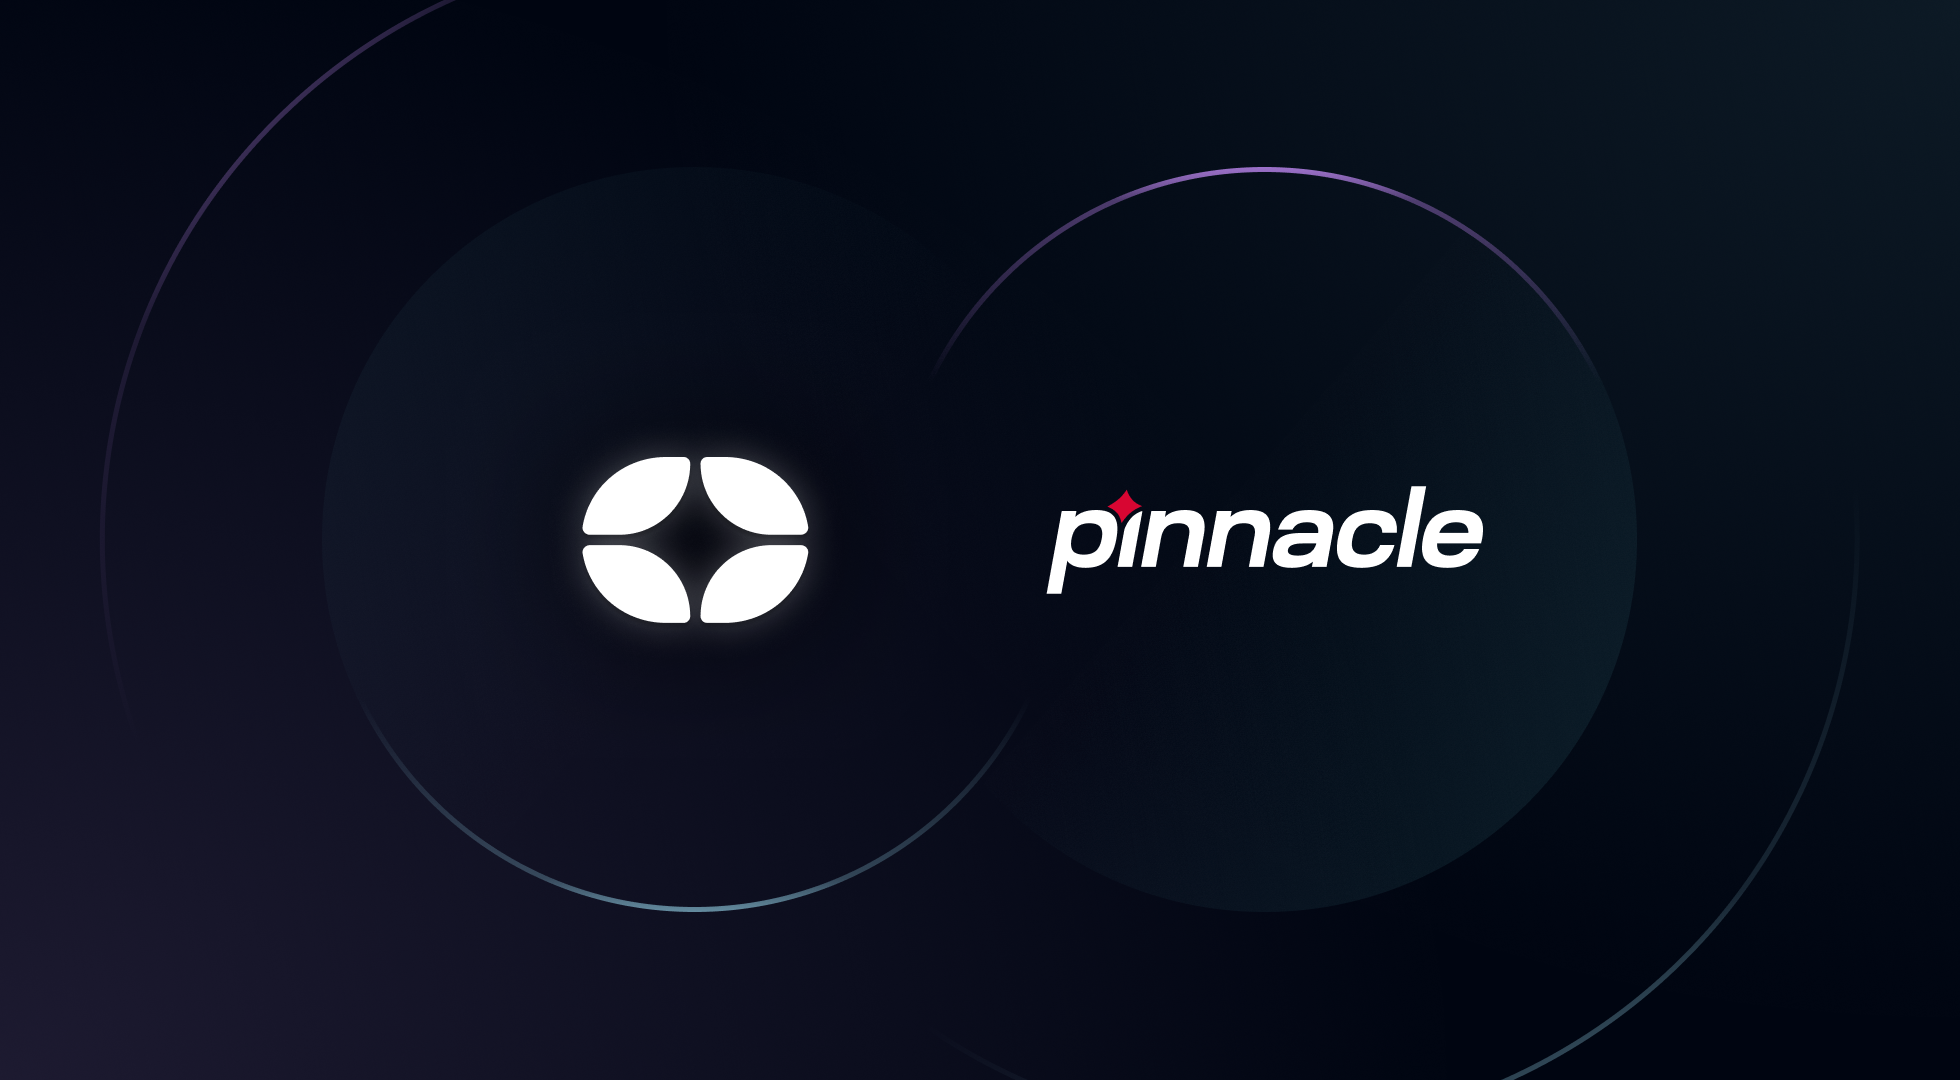 Control D and Pinnacle Unite to Bring Enhanced Internet Safety and Freedom to South Africa